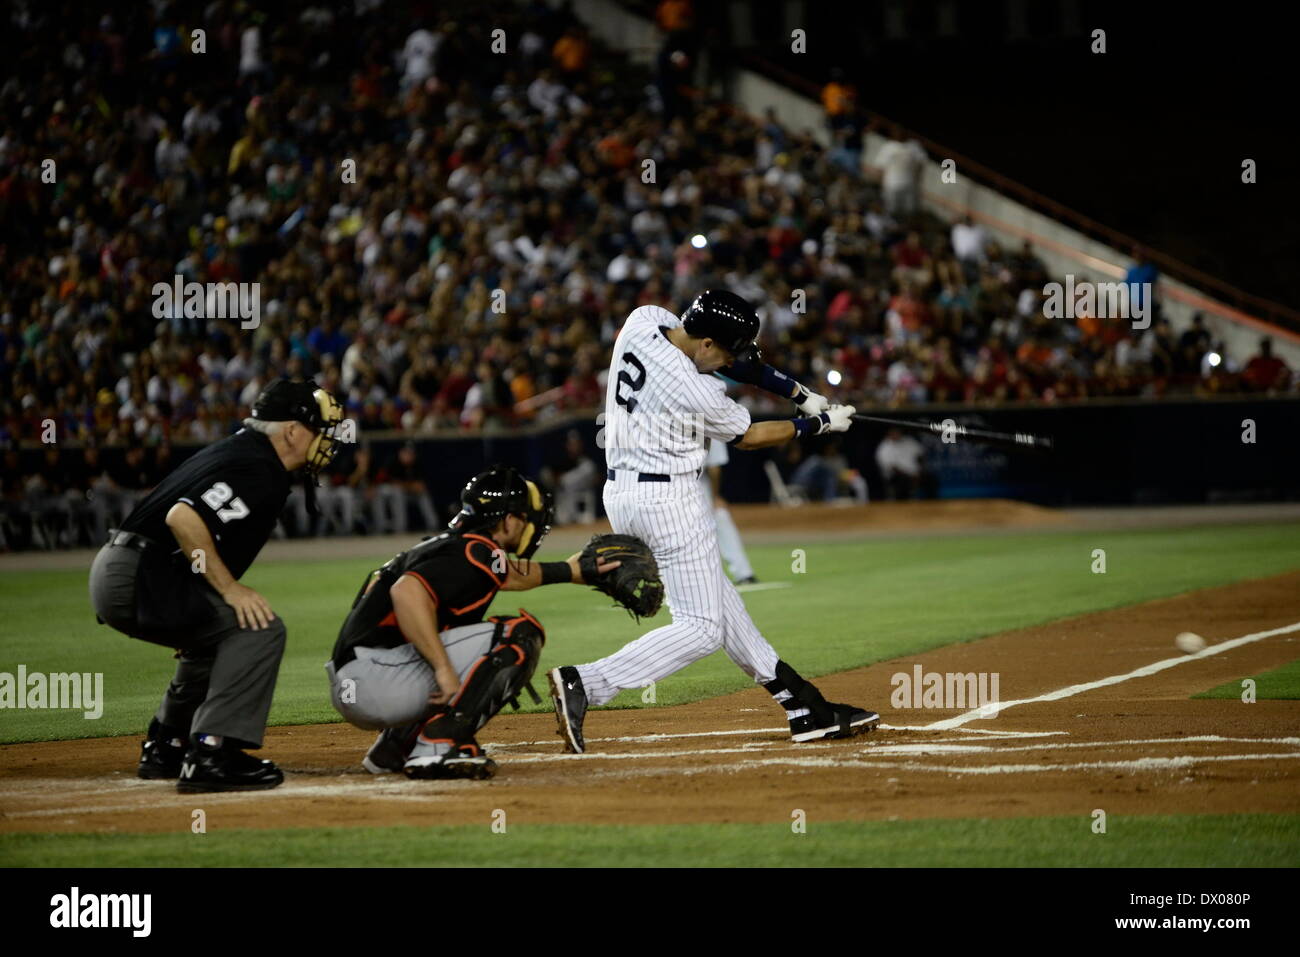 Panama City, Panama. 15th Mar, 2014. Derek Jeter(R) of the New York Yankees hits the ball during the match against Miami Marlins at Rod Carew Stadium, in Panama City, capital of Panama, on March 15, 2014. The New York Yankees and the Miami Marlins play exhibition games here in homage to Panama's former player Mariano Rivera. Credit:  Mauricio Valenzuela/Xinhua/Alamy Live News Stock Photo